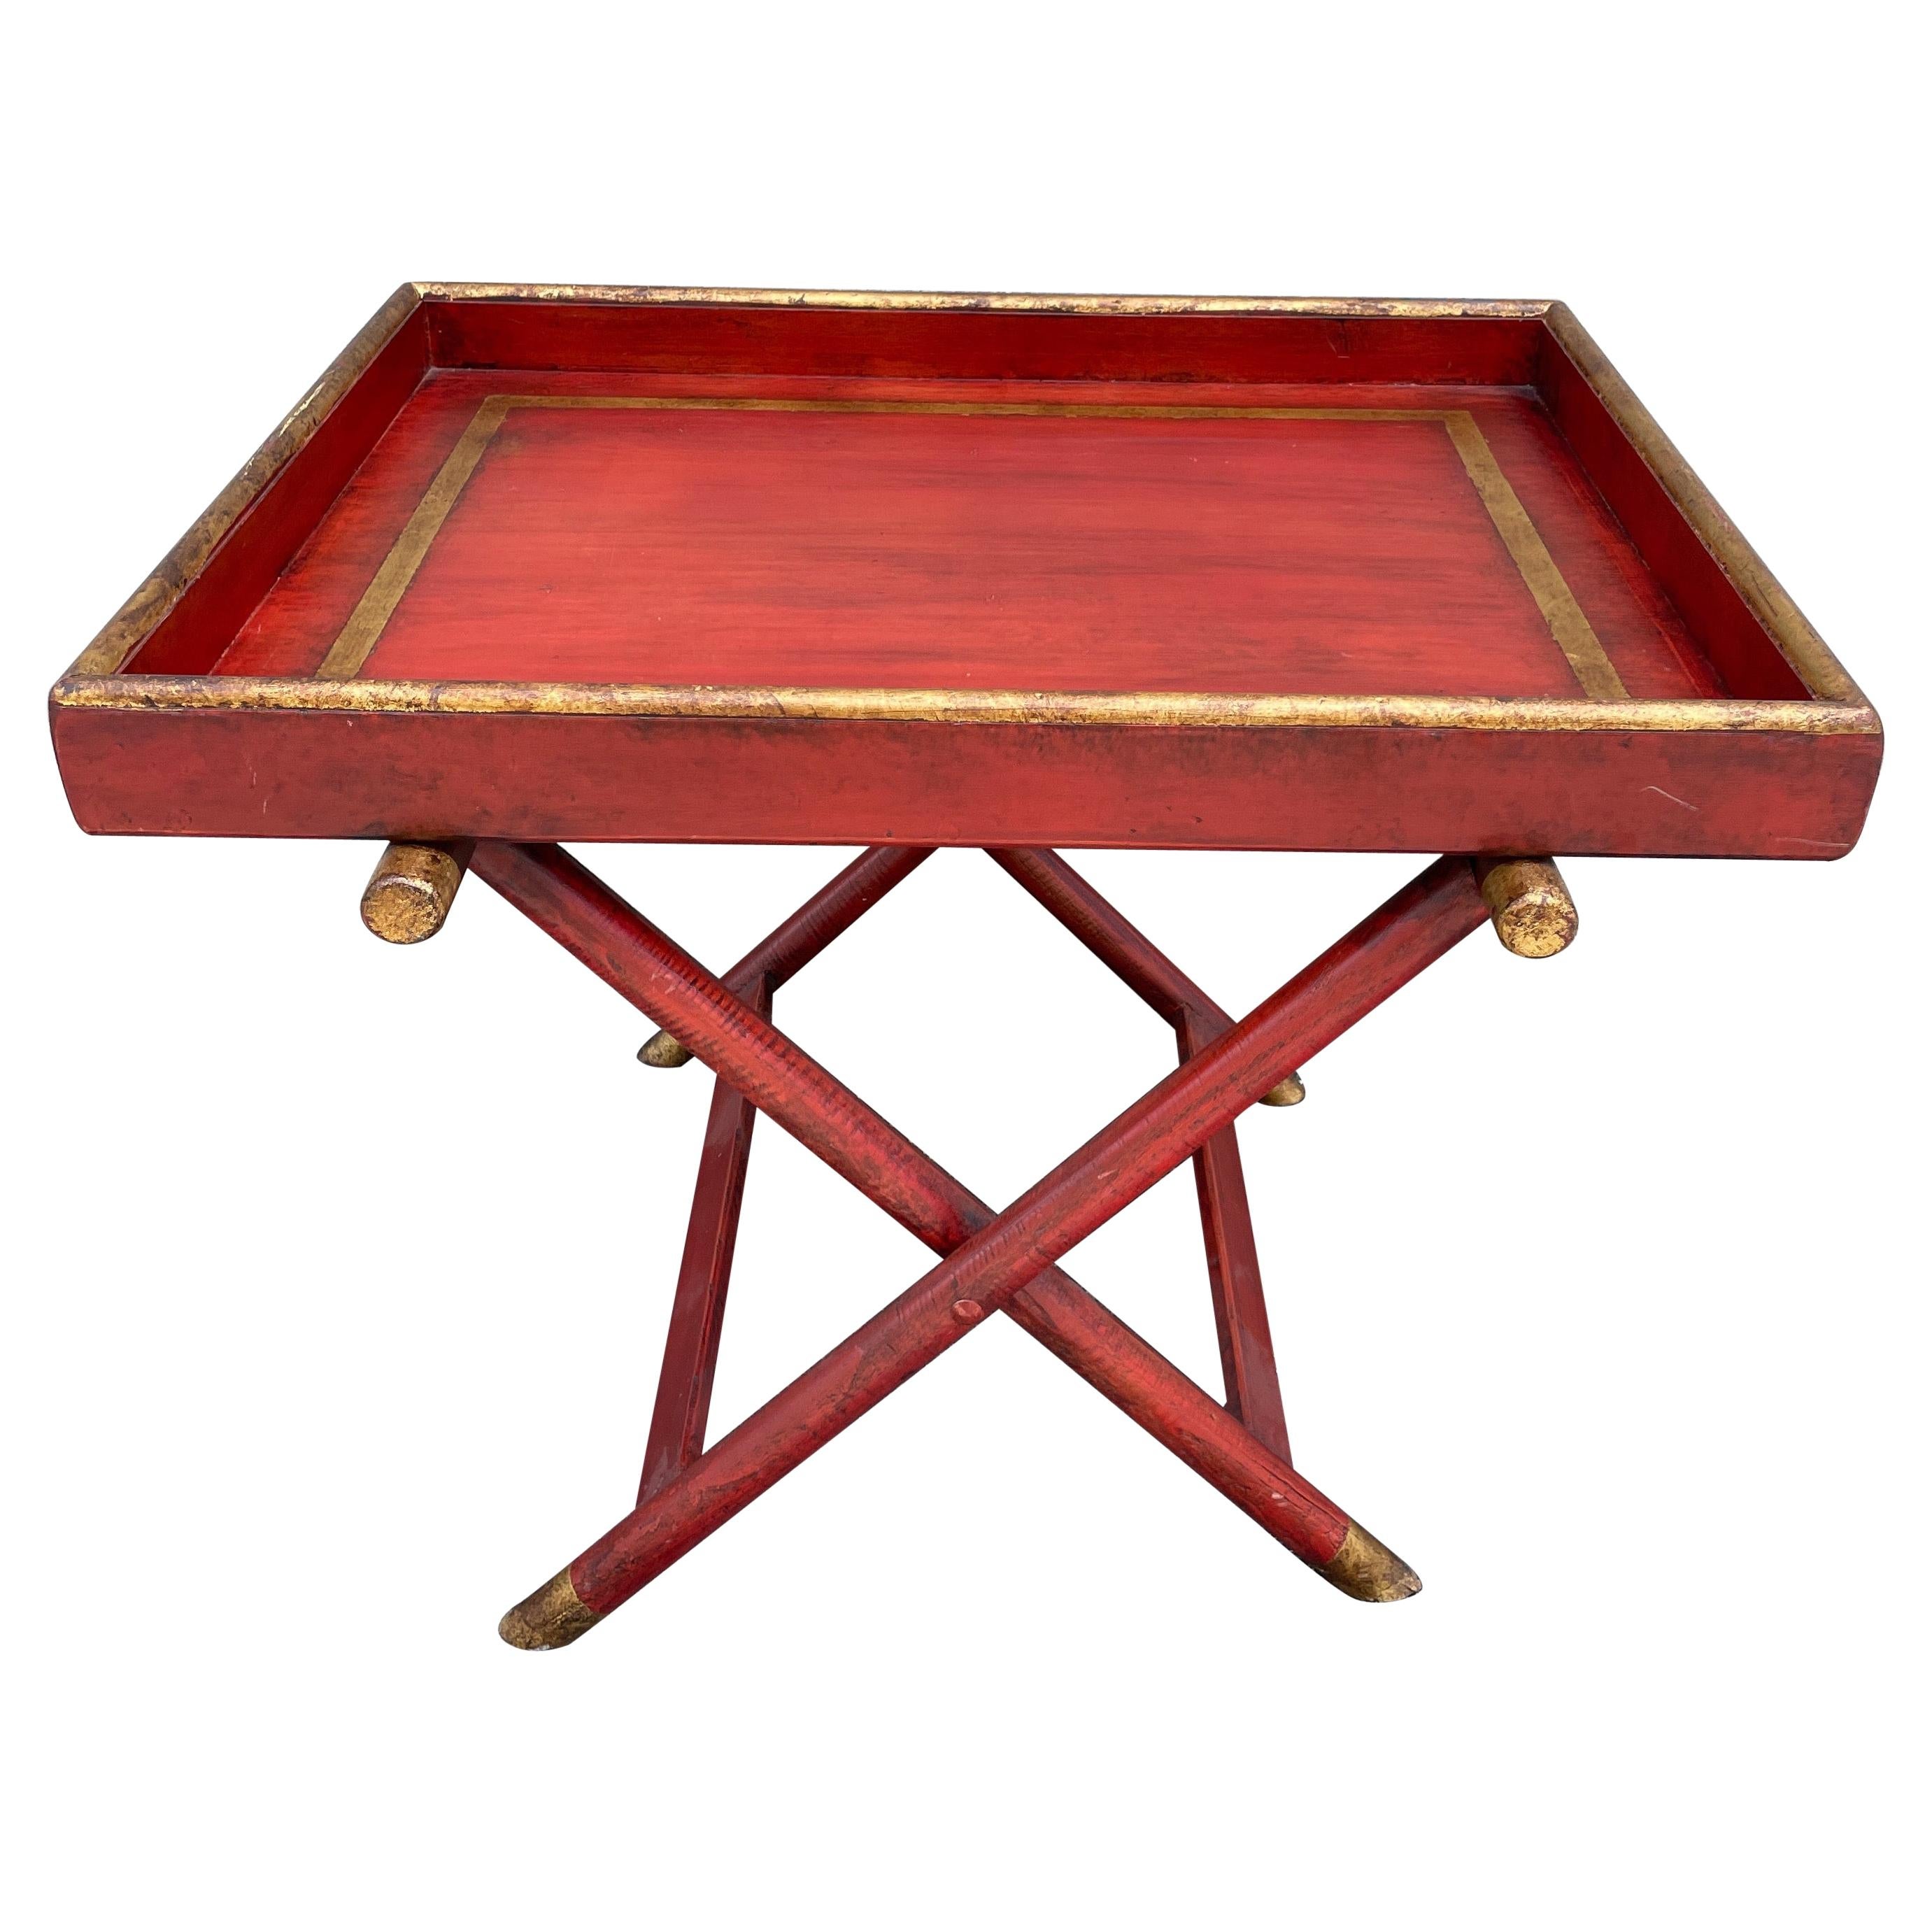 Painted Red & Gold Tray Top Table with X Base